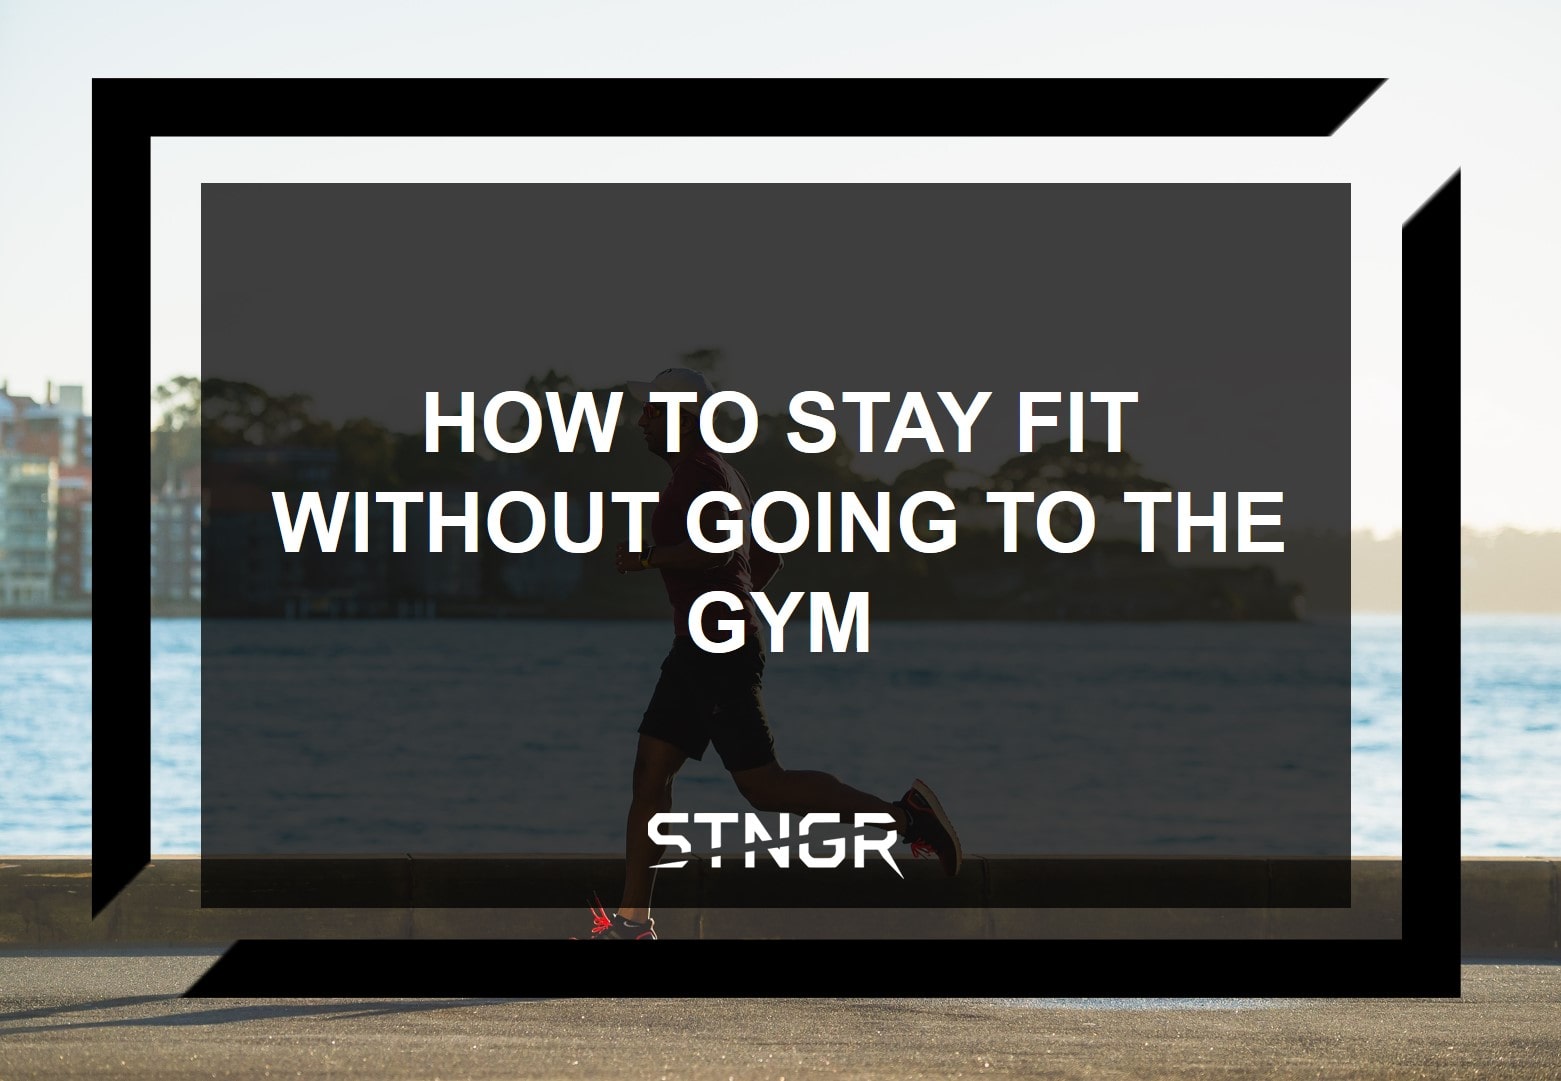 How To Stay Fit Without Going to the Gym